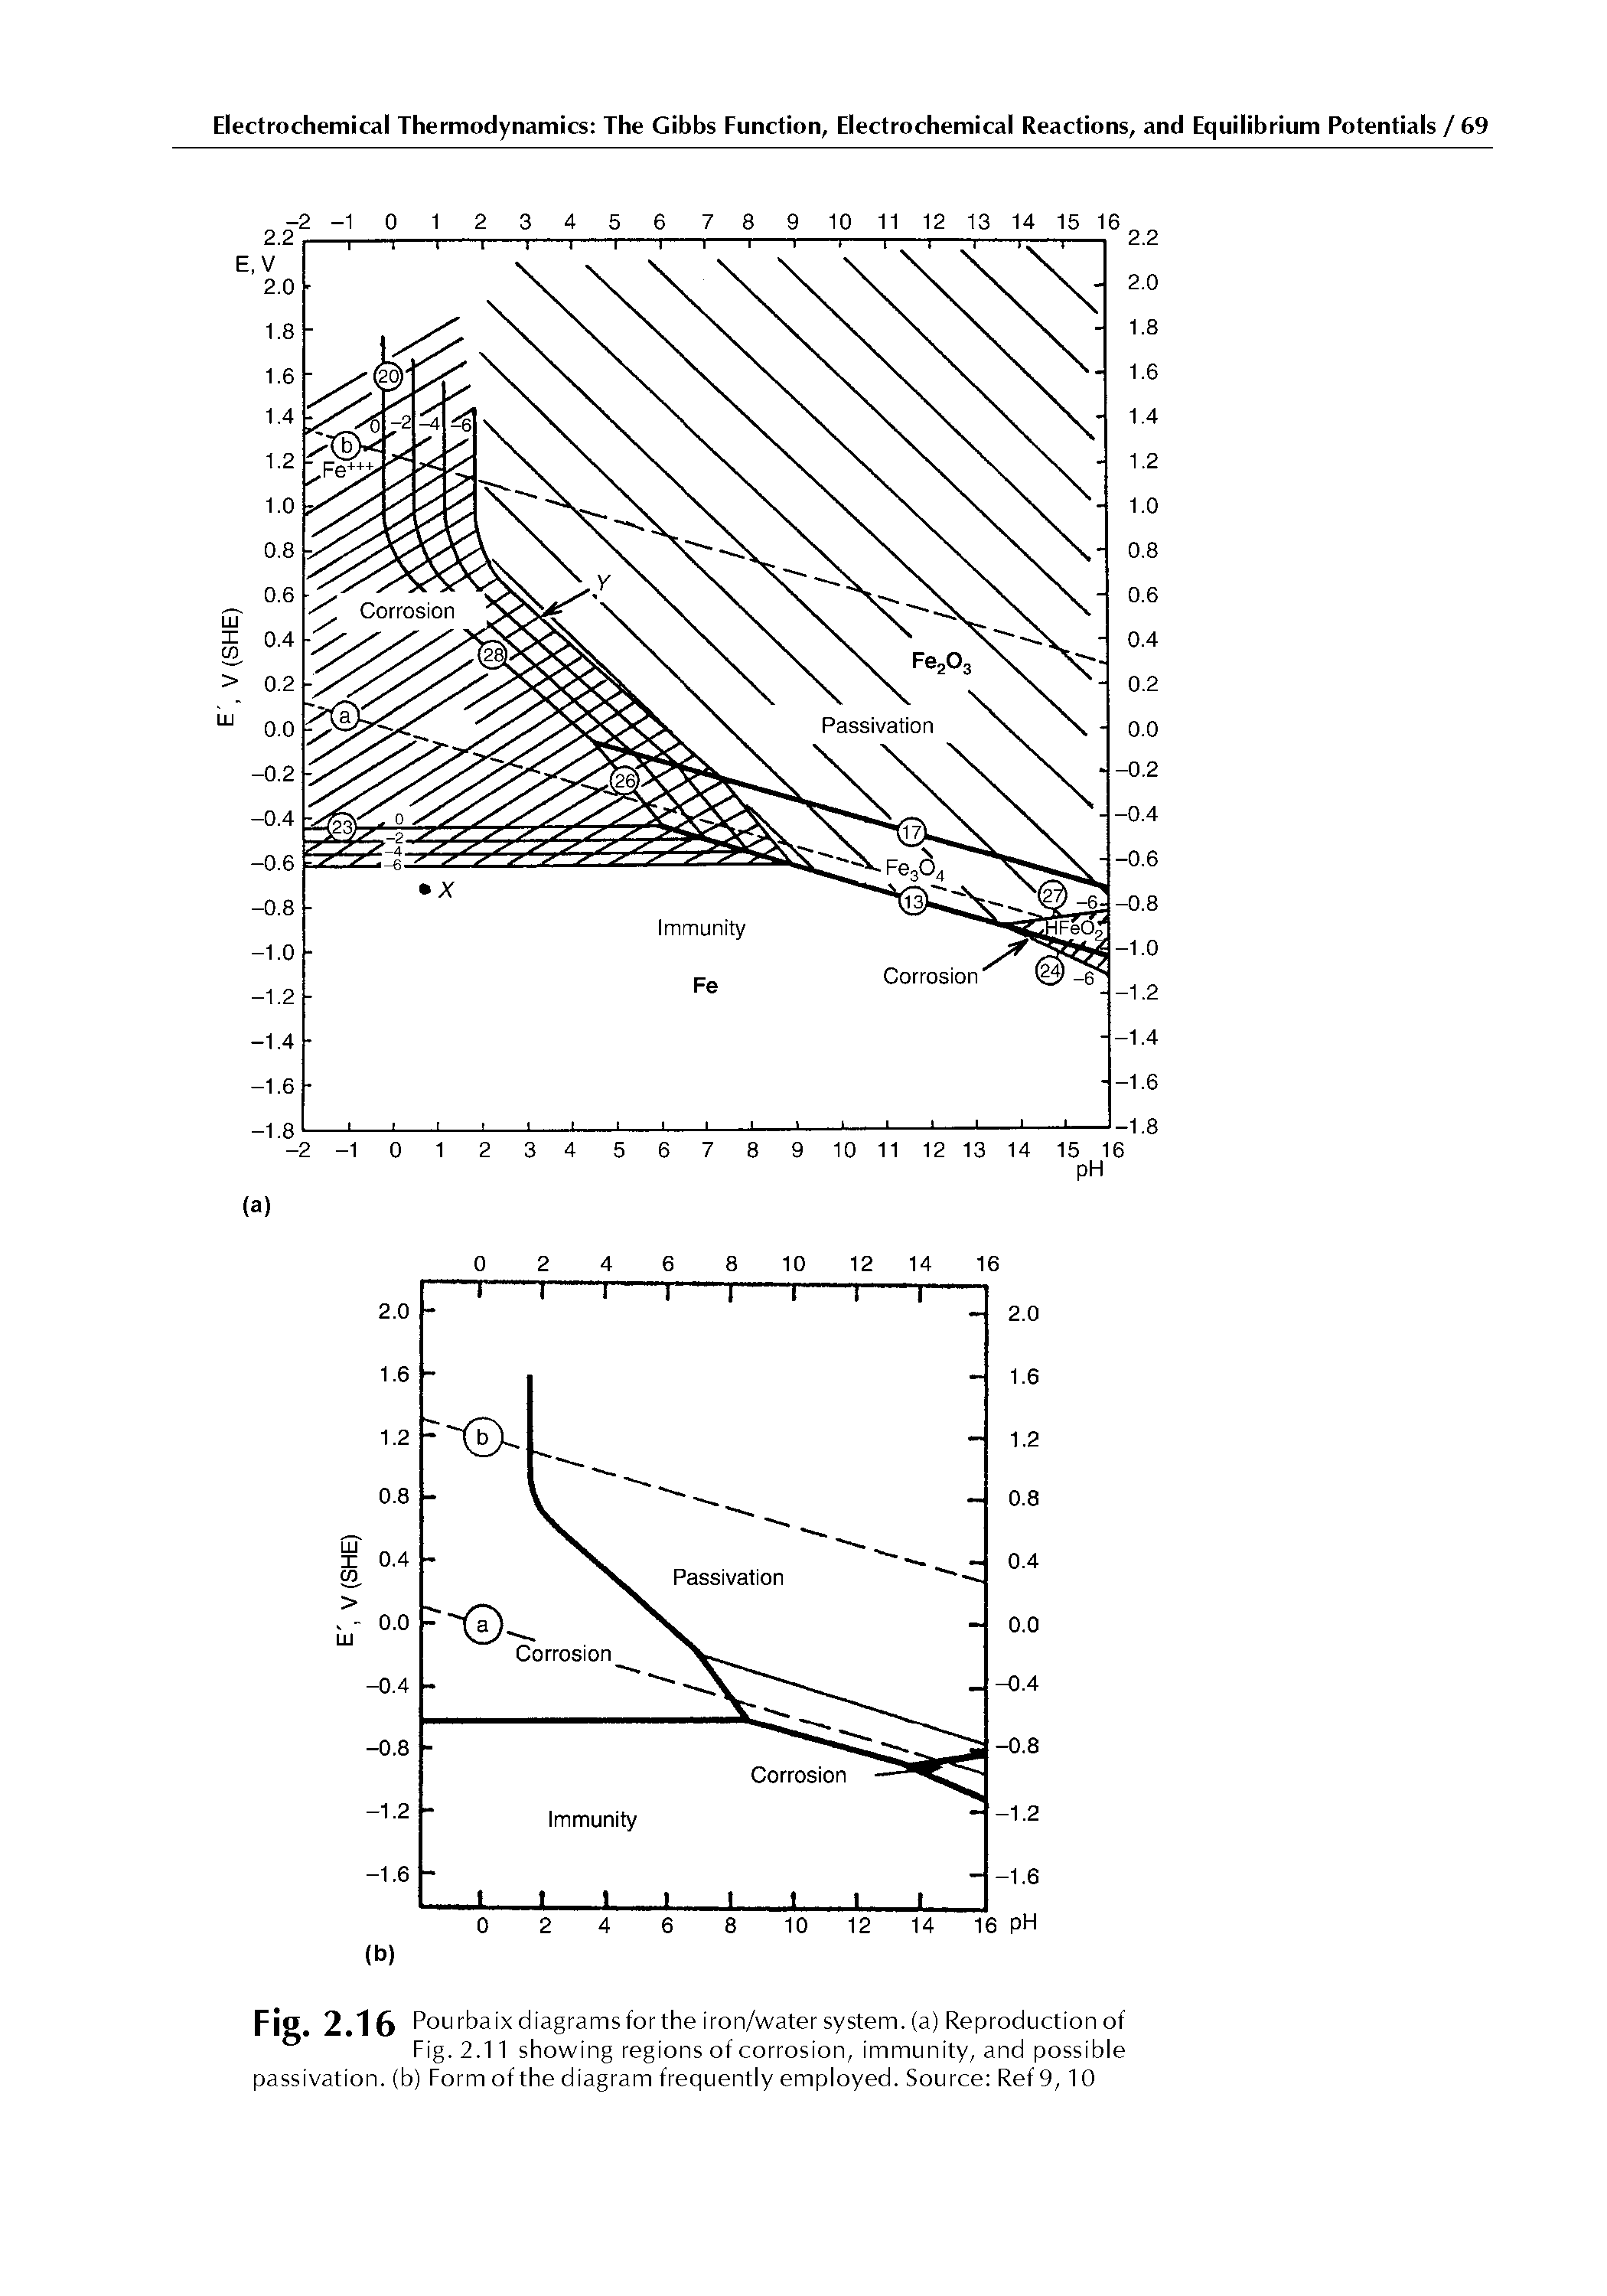 Fig. 2.16 Pourbaix diagrams for the iron/water system, (a) Reproduction of Fig. 2.11 showing regions of corrosion, immunity, and possible passivation, (b) Form of the diagram frequently employed. Source Ref 9, 10...